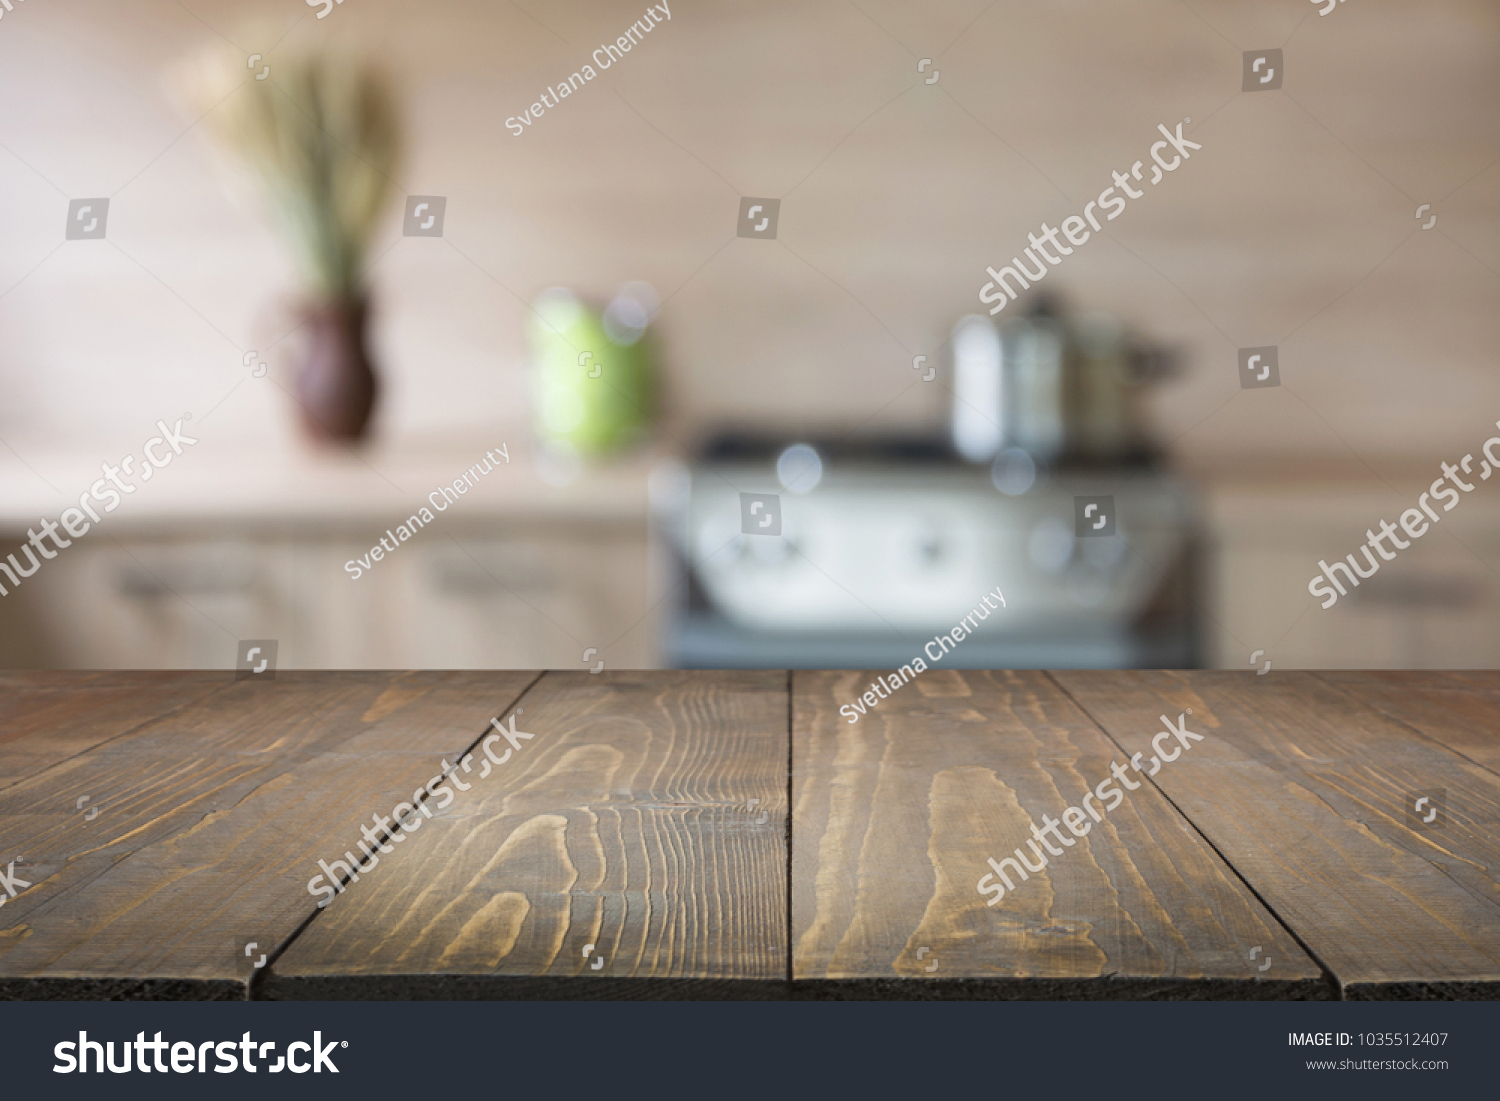 Blurred abstract background. Modern kitchen with tabletop and space for you. #1035512407